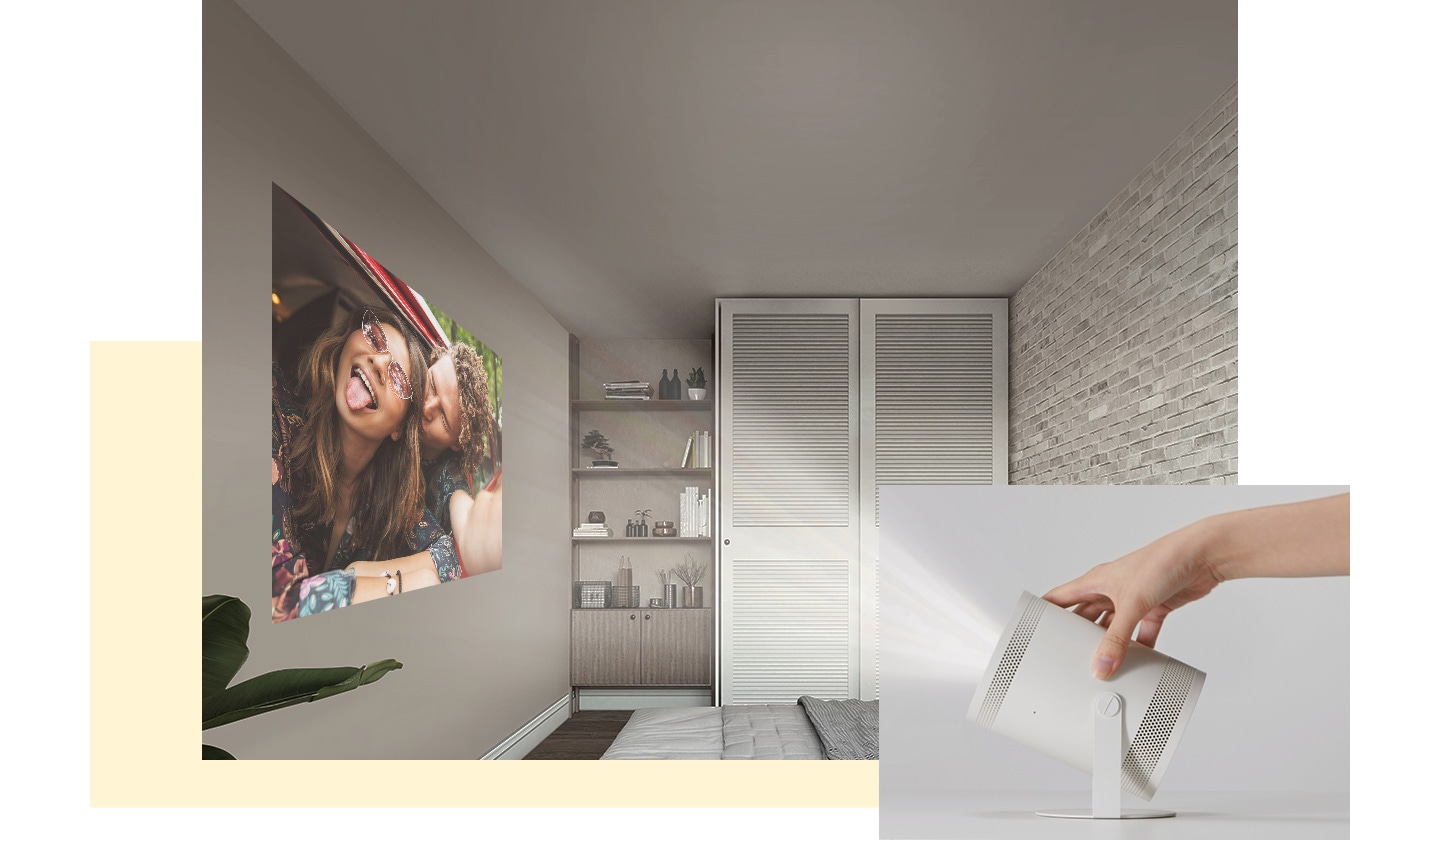 As hand adjusts the angle of The Freestyle upwards, the screen moves accordingly up the wall and onto the ceiling.